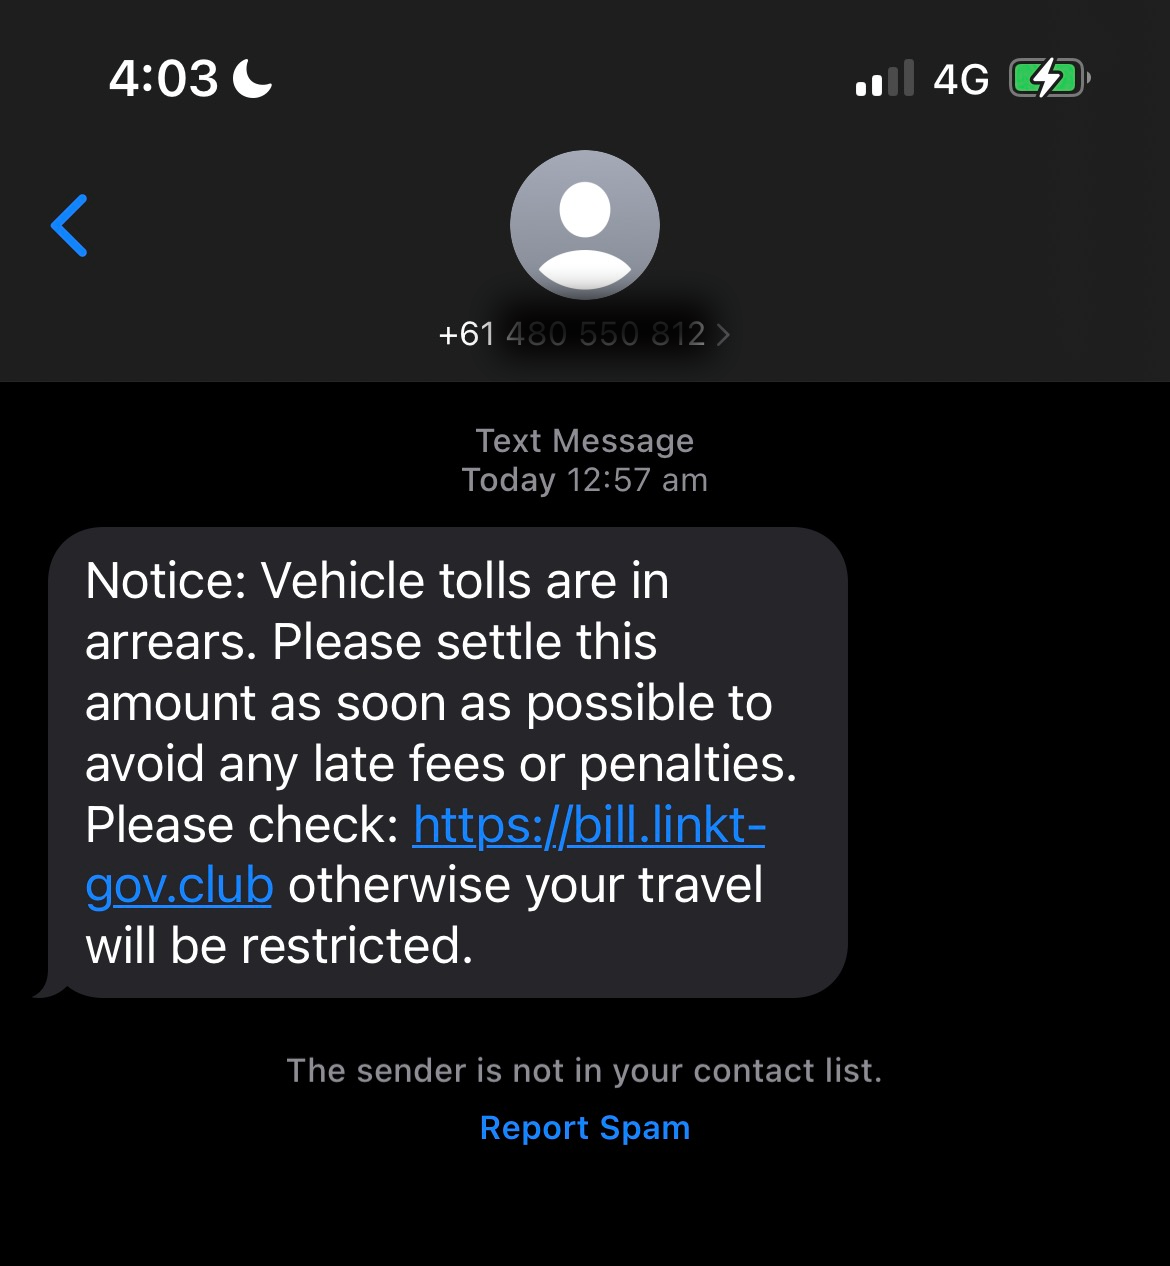 text message saying Notice: Vehicle tolls are in arrears. Please settle this amount as soon as possible to avoid any late fees or penalties. Please check: Using an unauthorised URL linkt.gov.club and threatening to restrict travel.